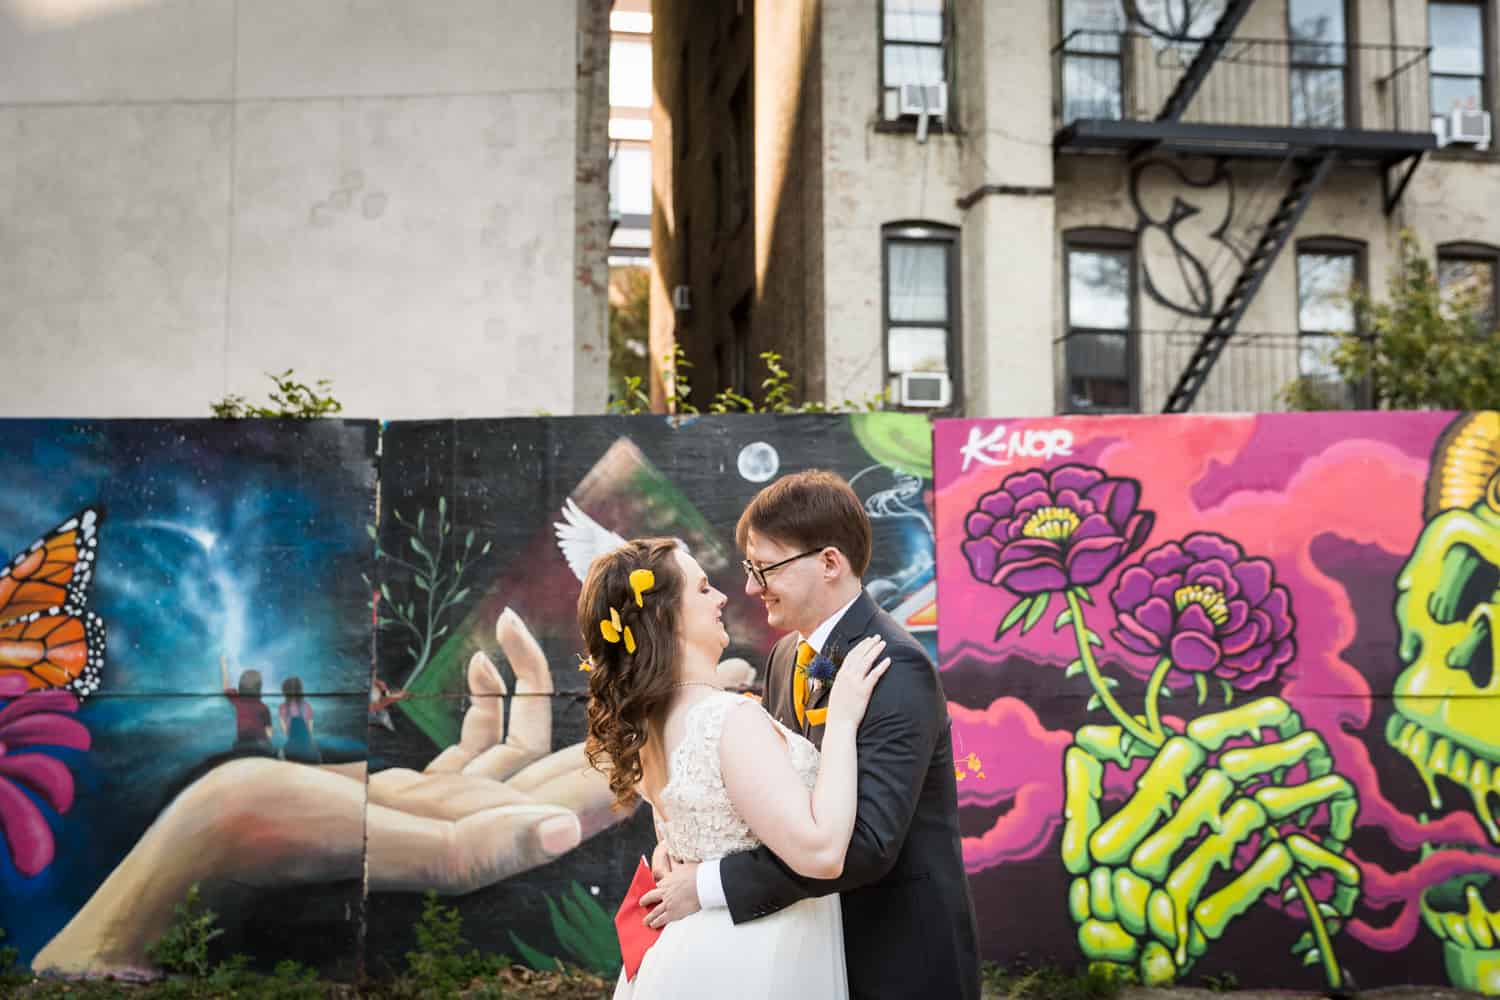 Bride and groom hugging in front of graffiti for an article on Covid-19 wedding planning